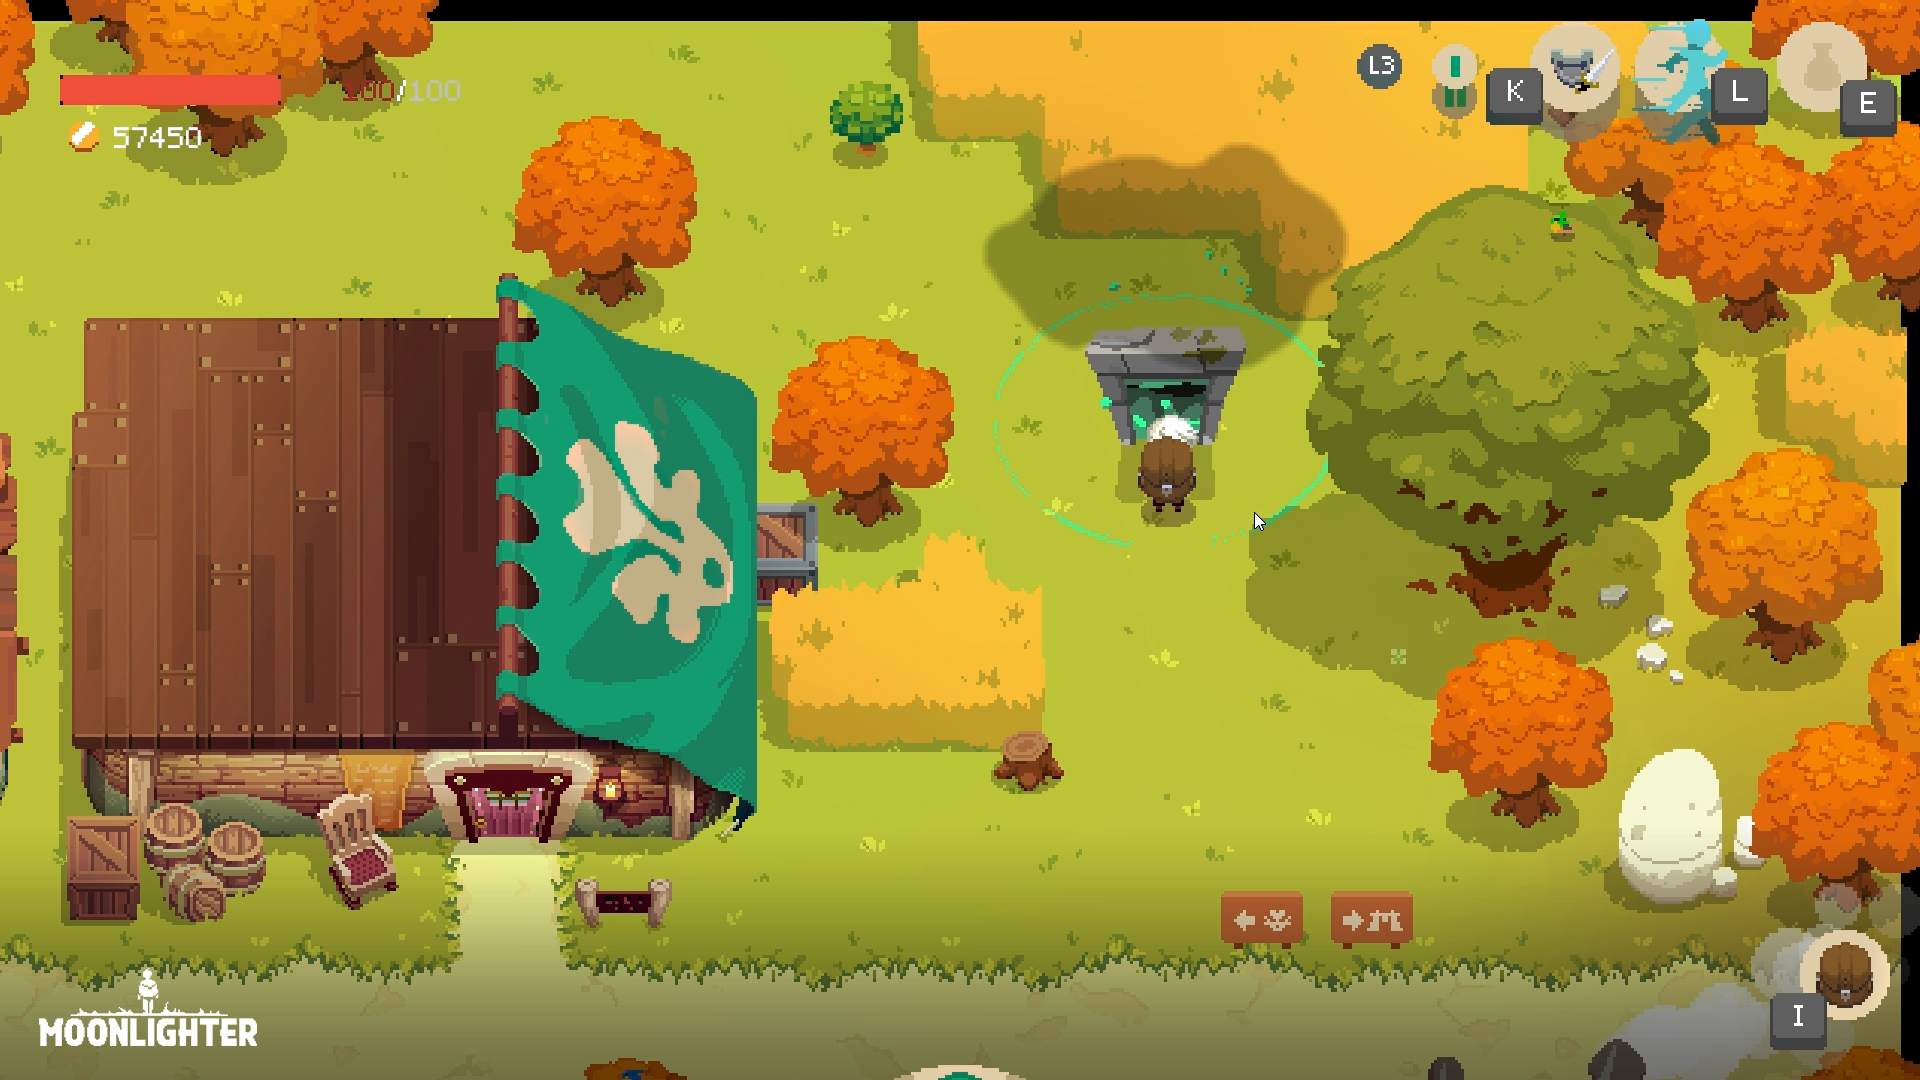 Moonlighter download the last version for iphone